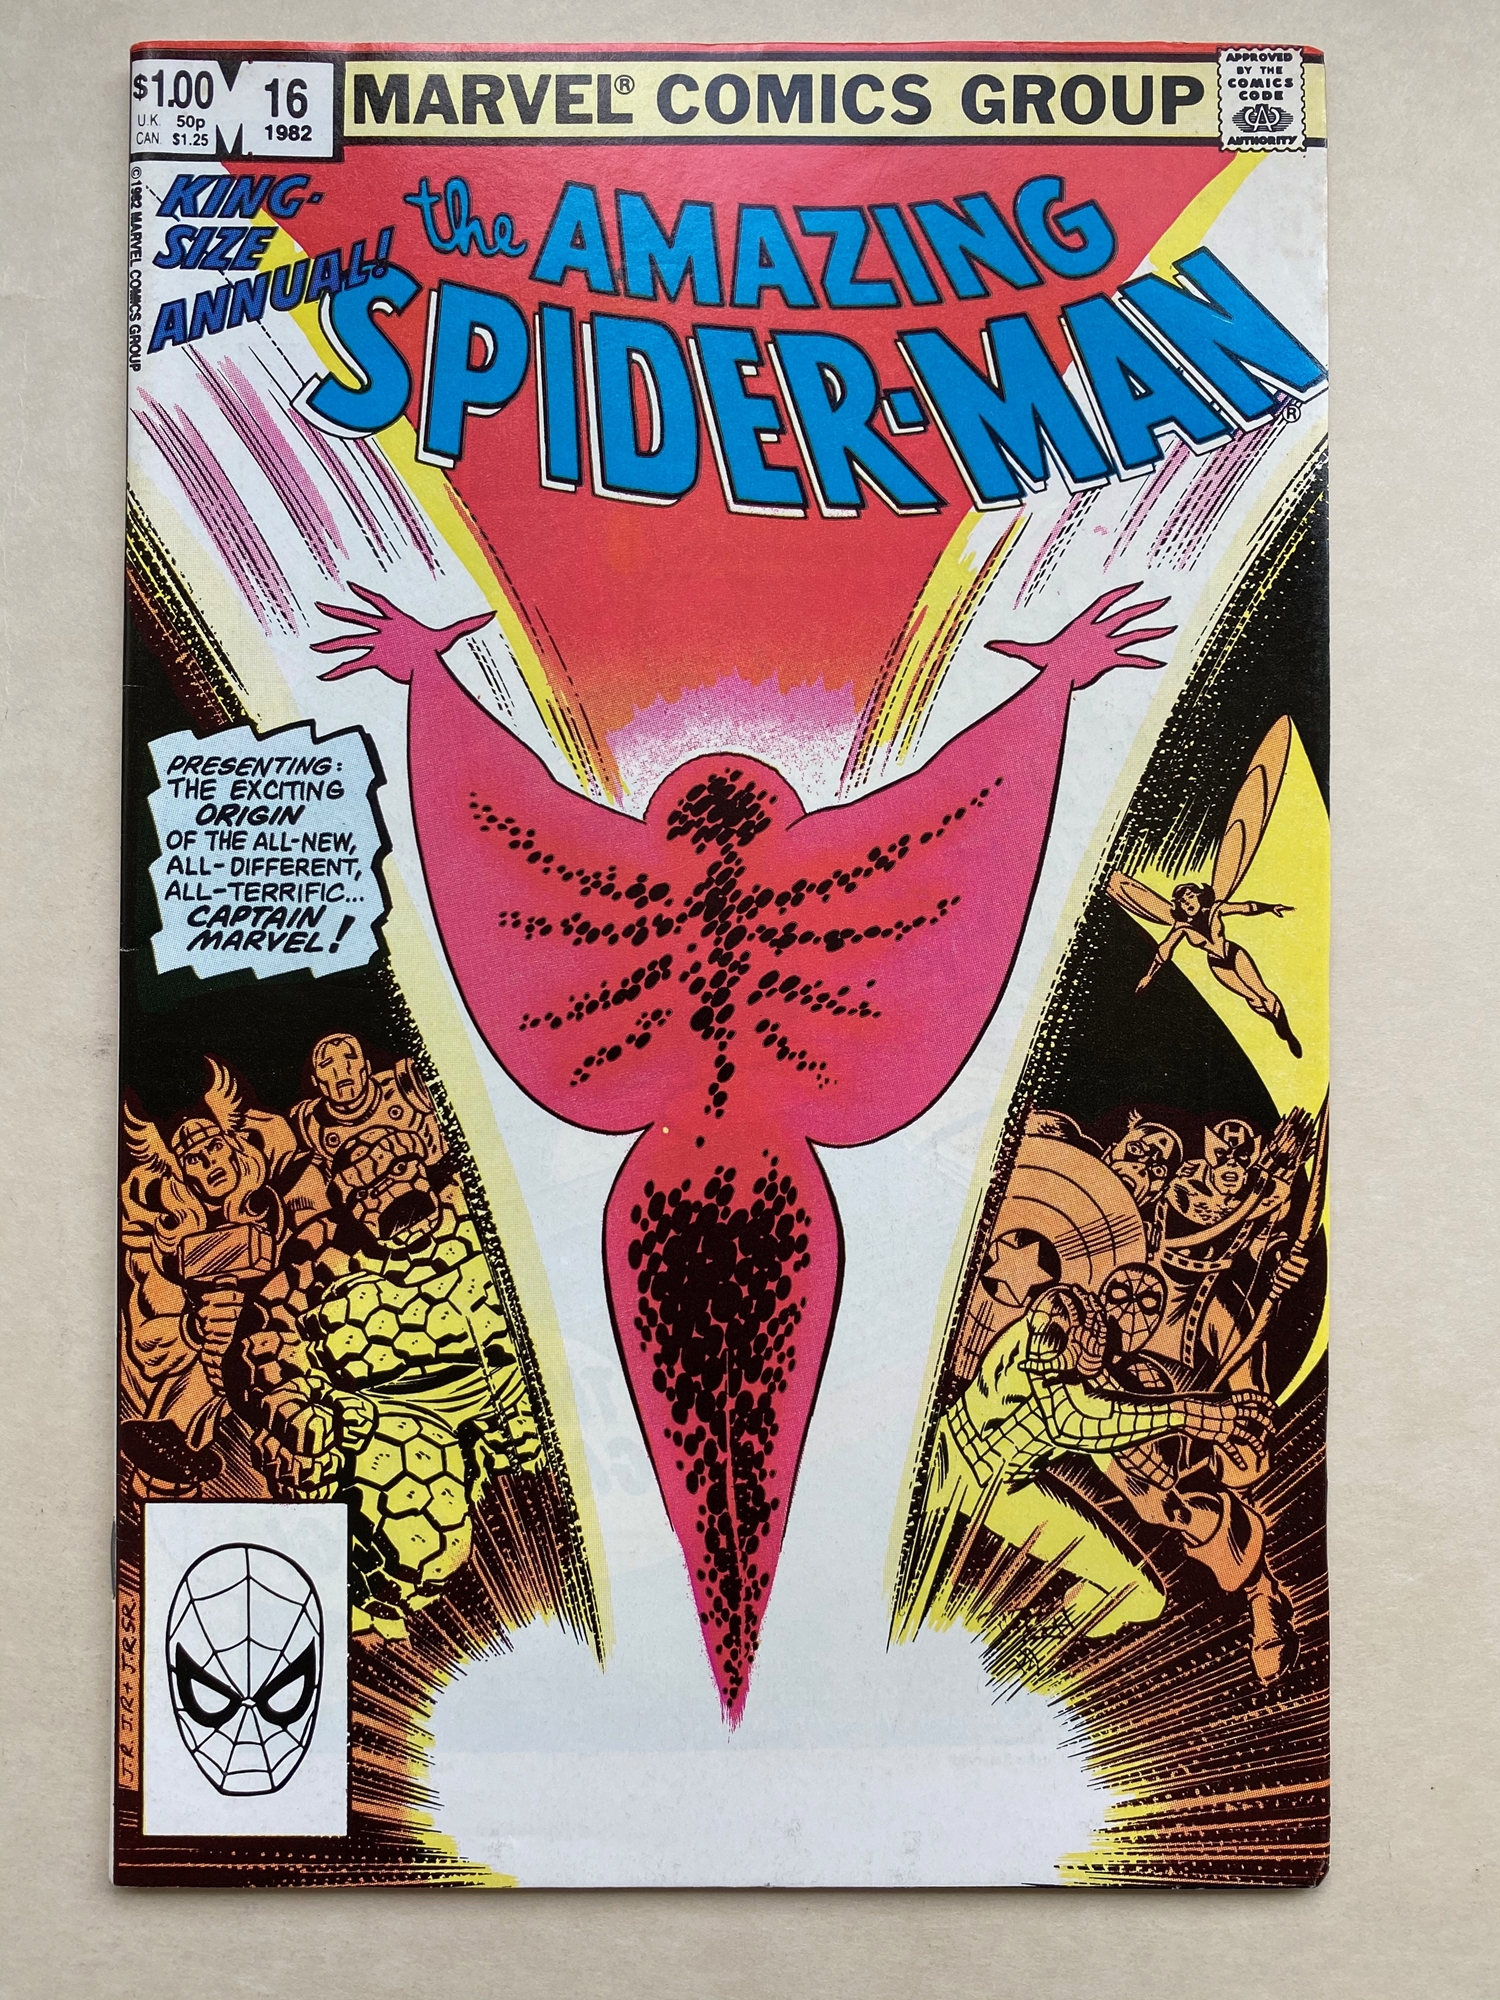 AMAZING SPIDER-MAN KING-SIZE ANNUAL #16 - (1982 - MARVEL - Cents/Pence Copy) - Origin & first